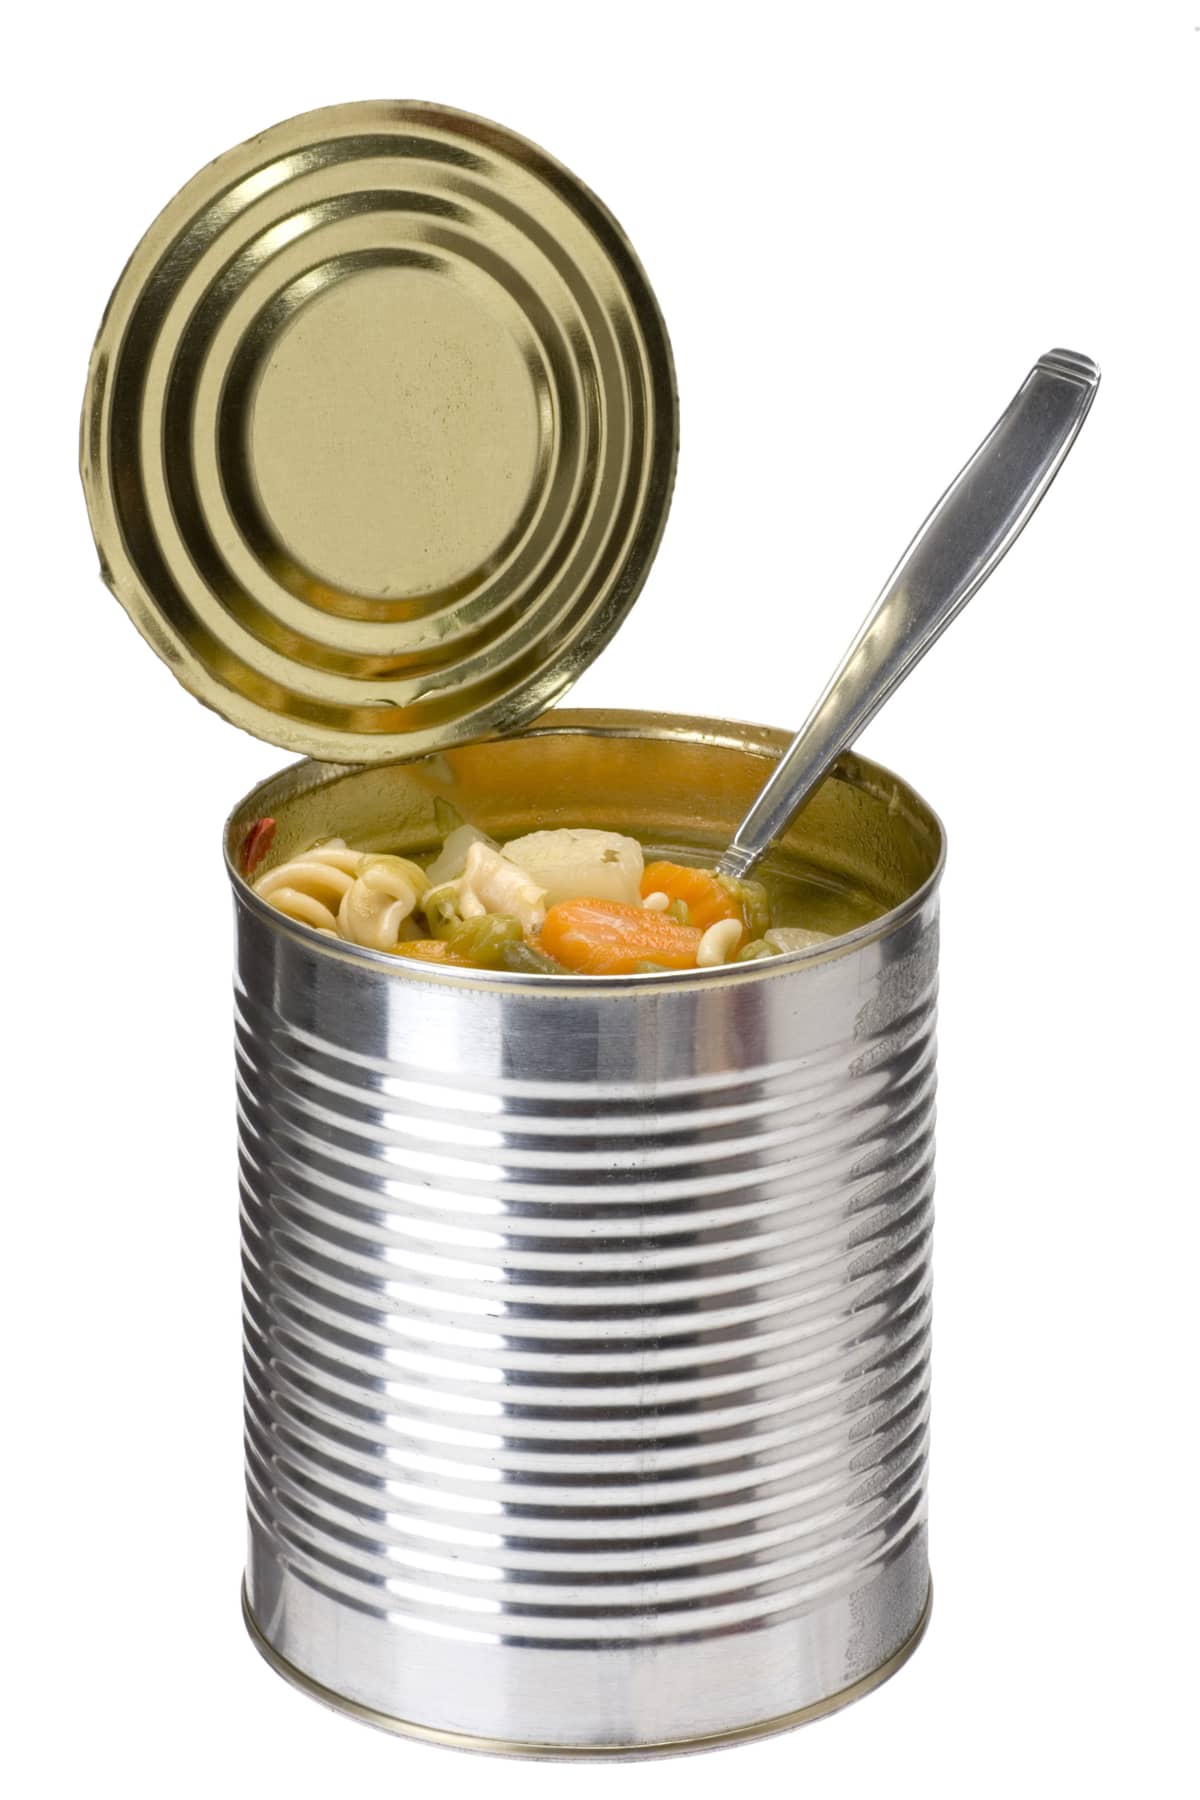 Canned chicken noodle soup with a spoon in it